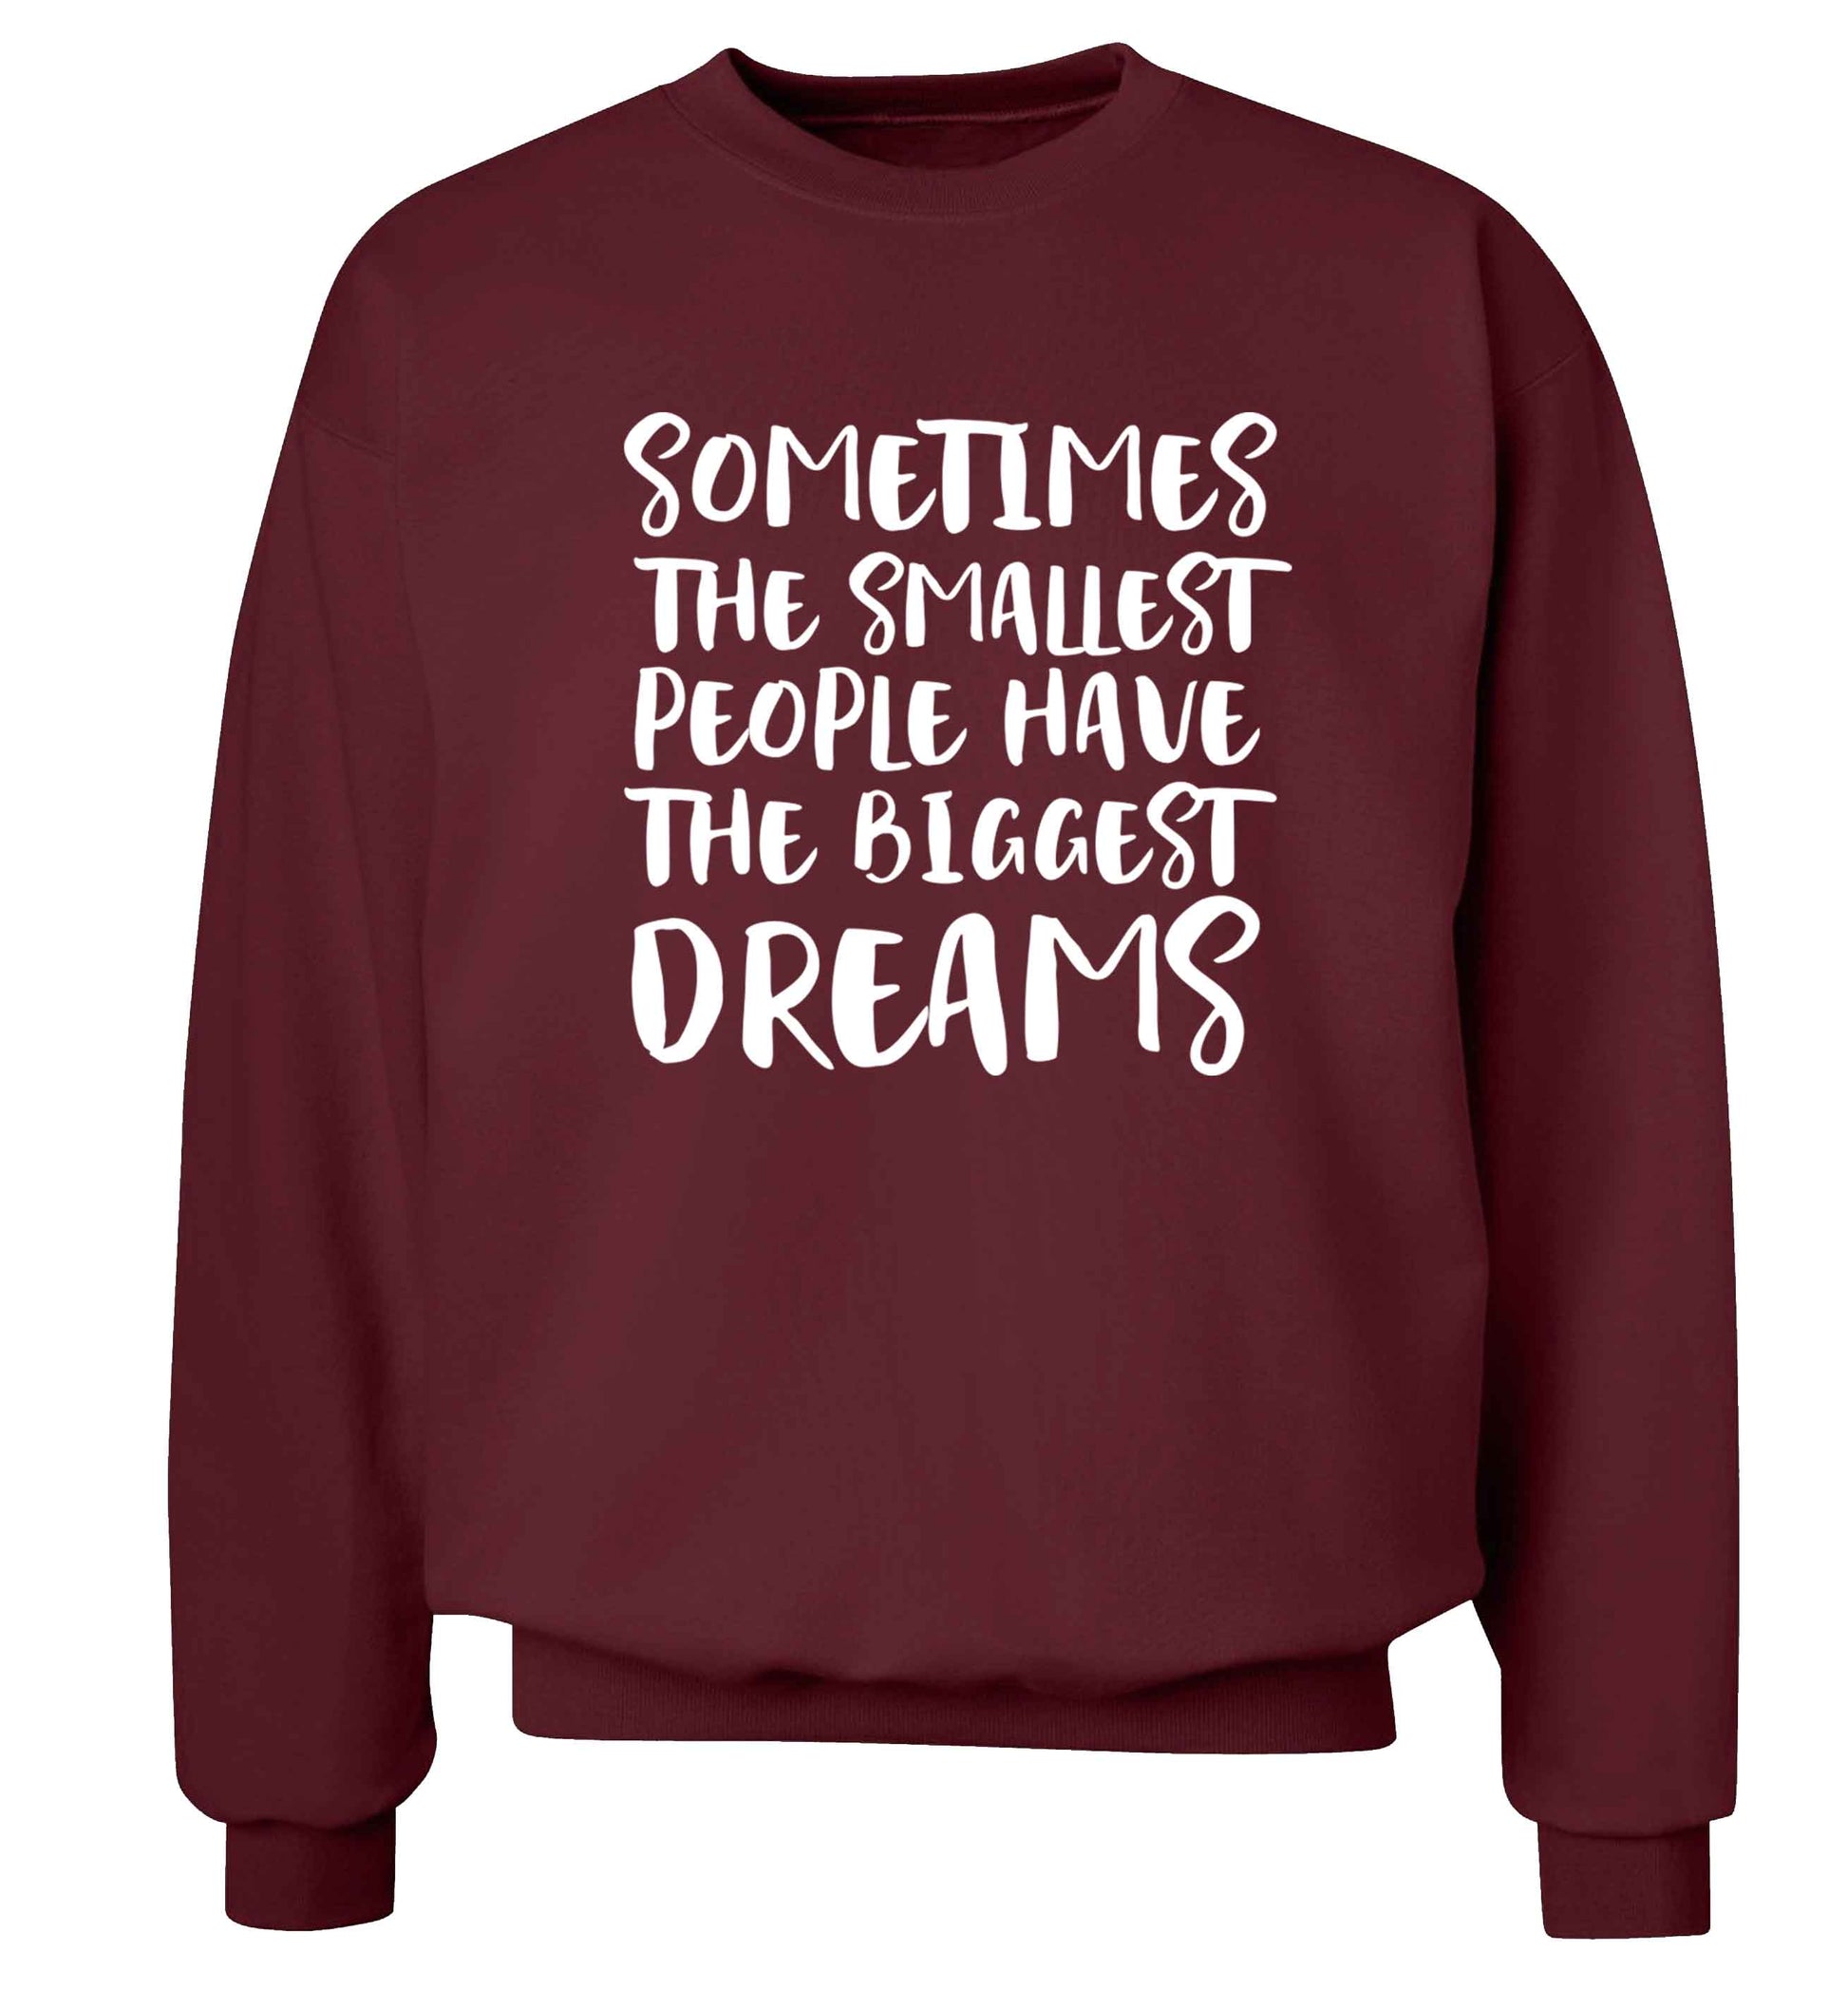 Sometimes the smallest people have the biggest dreams Adult's unisex maroon Sweater 2XL